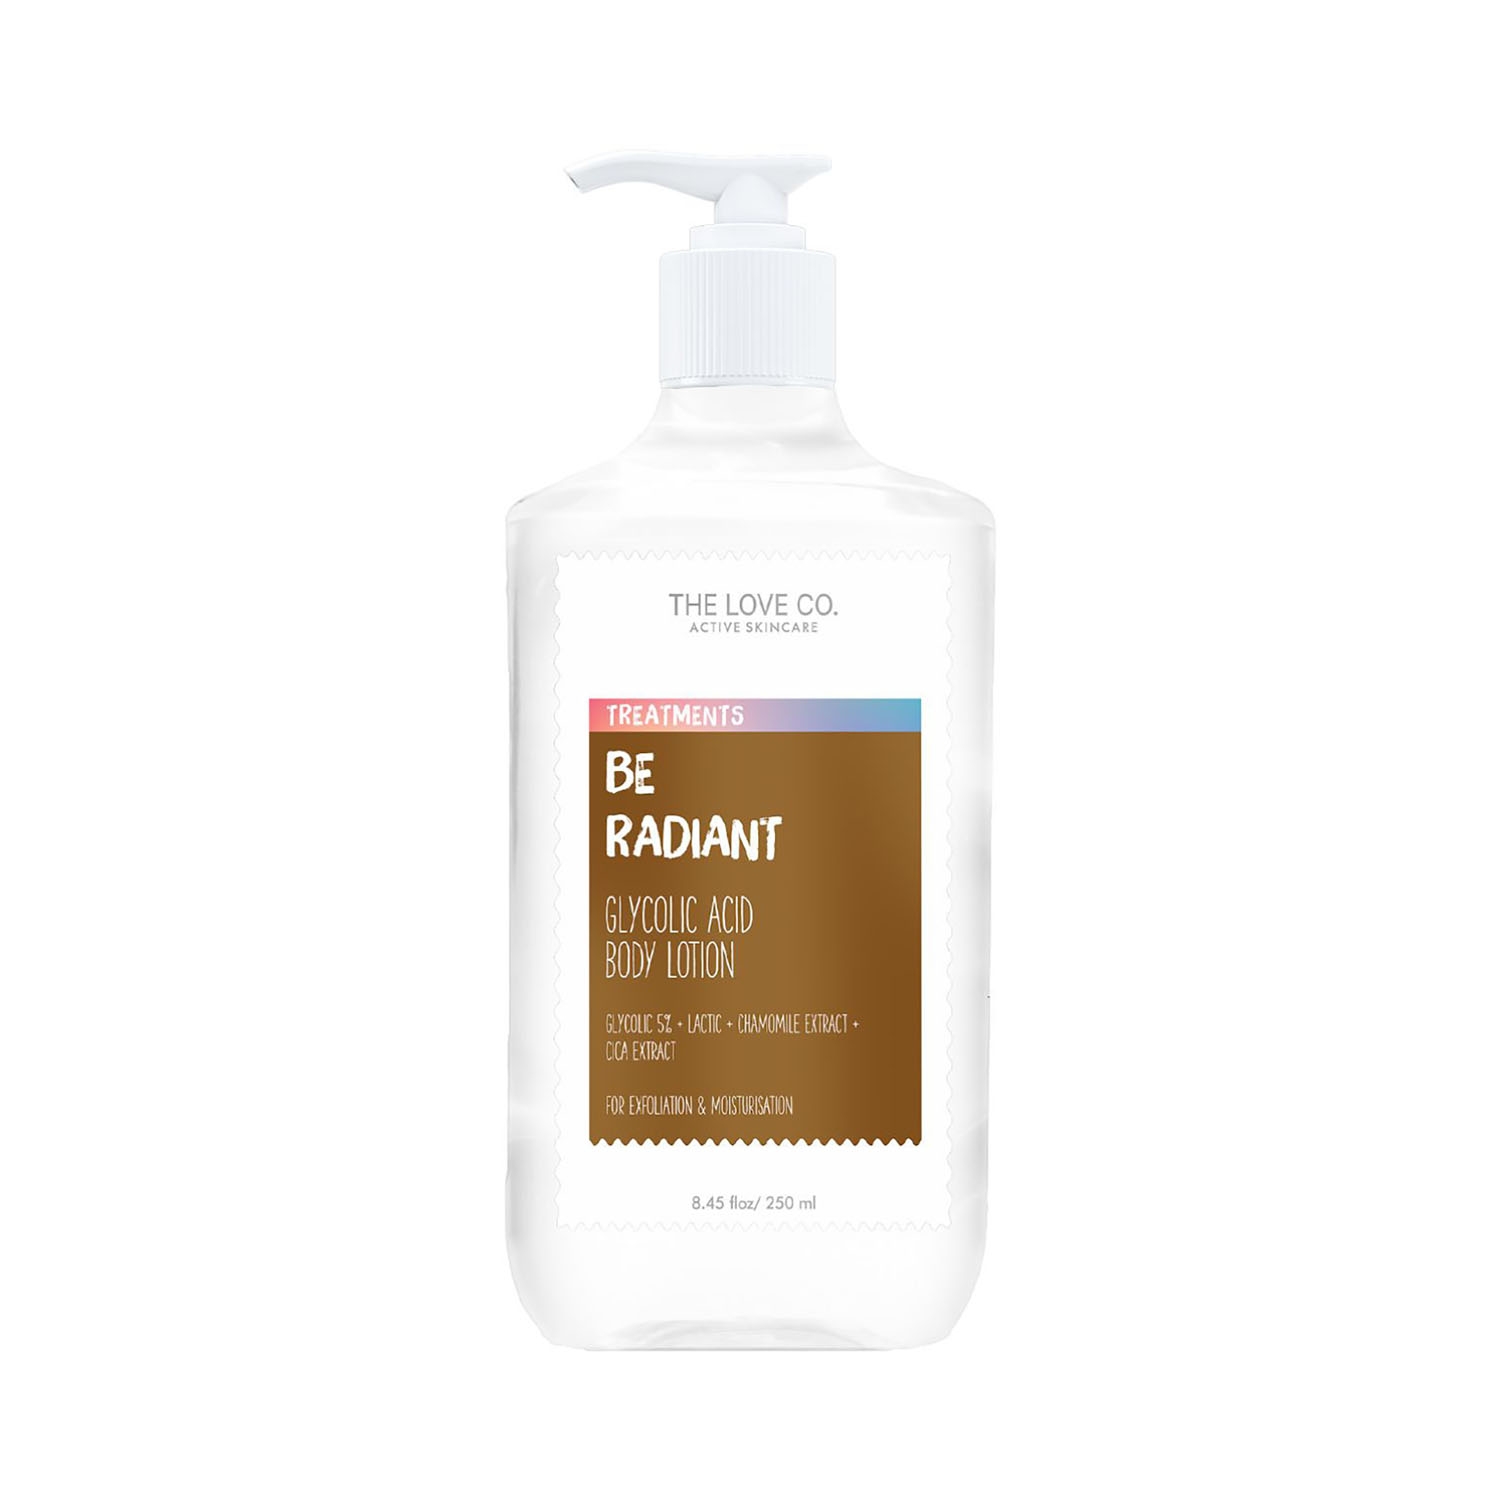 THE LOVE CO. Be Radiant Glycolic Acid Body Lotion (250ml)